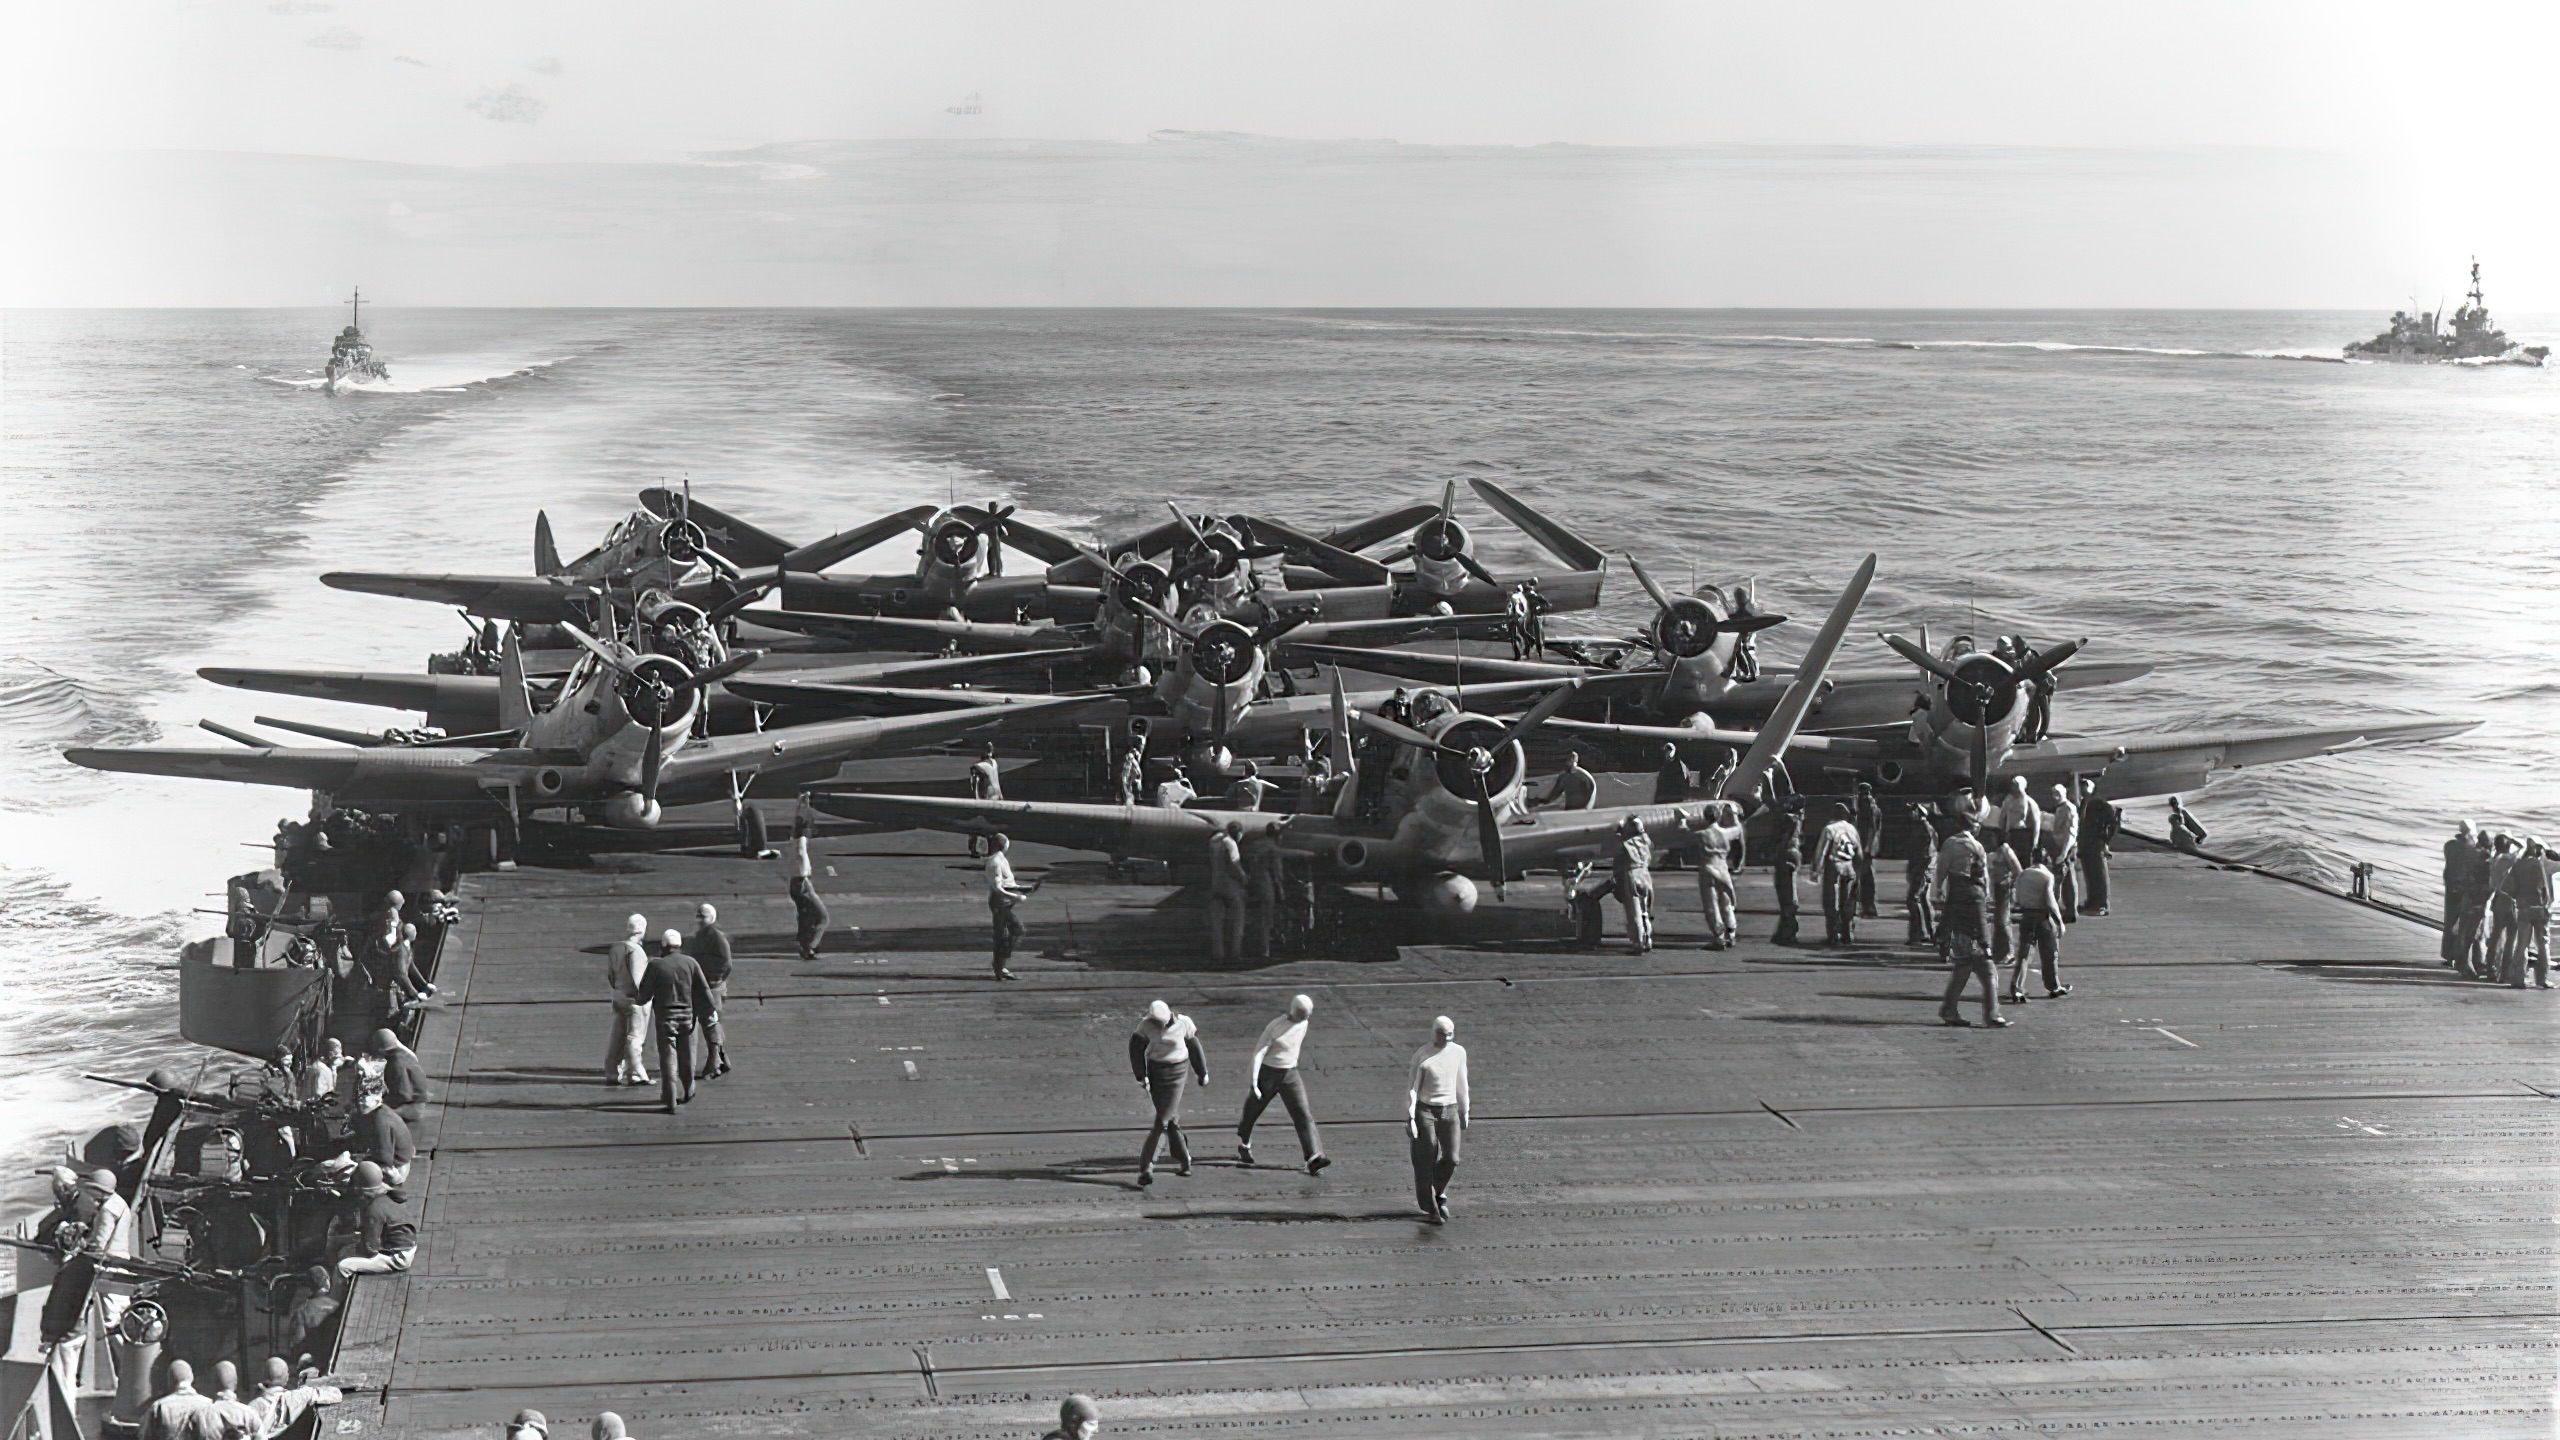 VT-6 TBDs on USS Enterprise, during the Battle of Midway